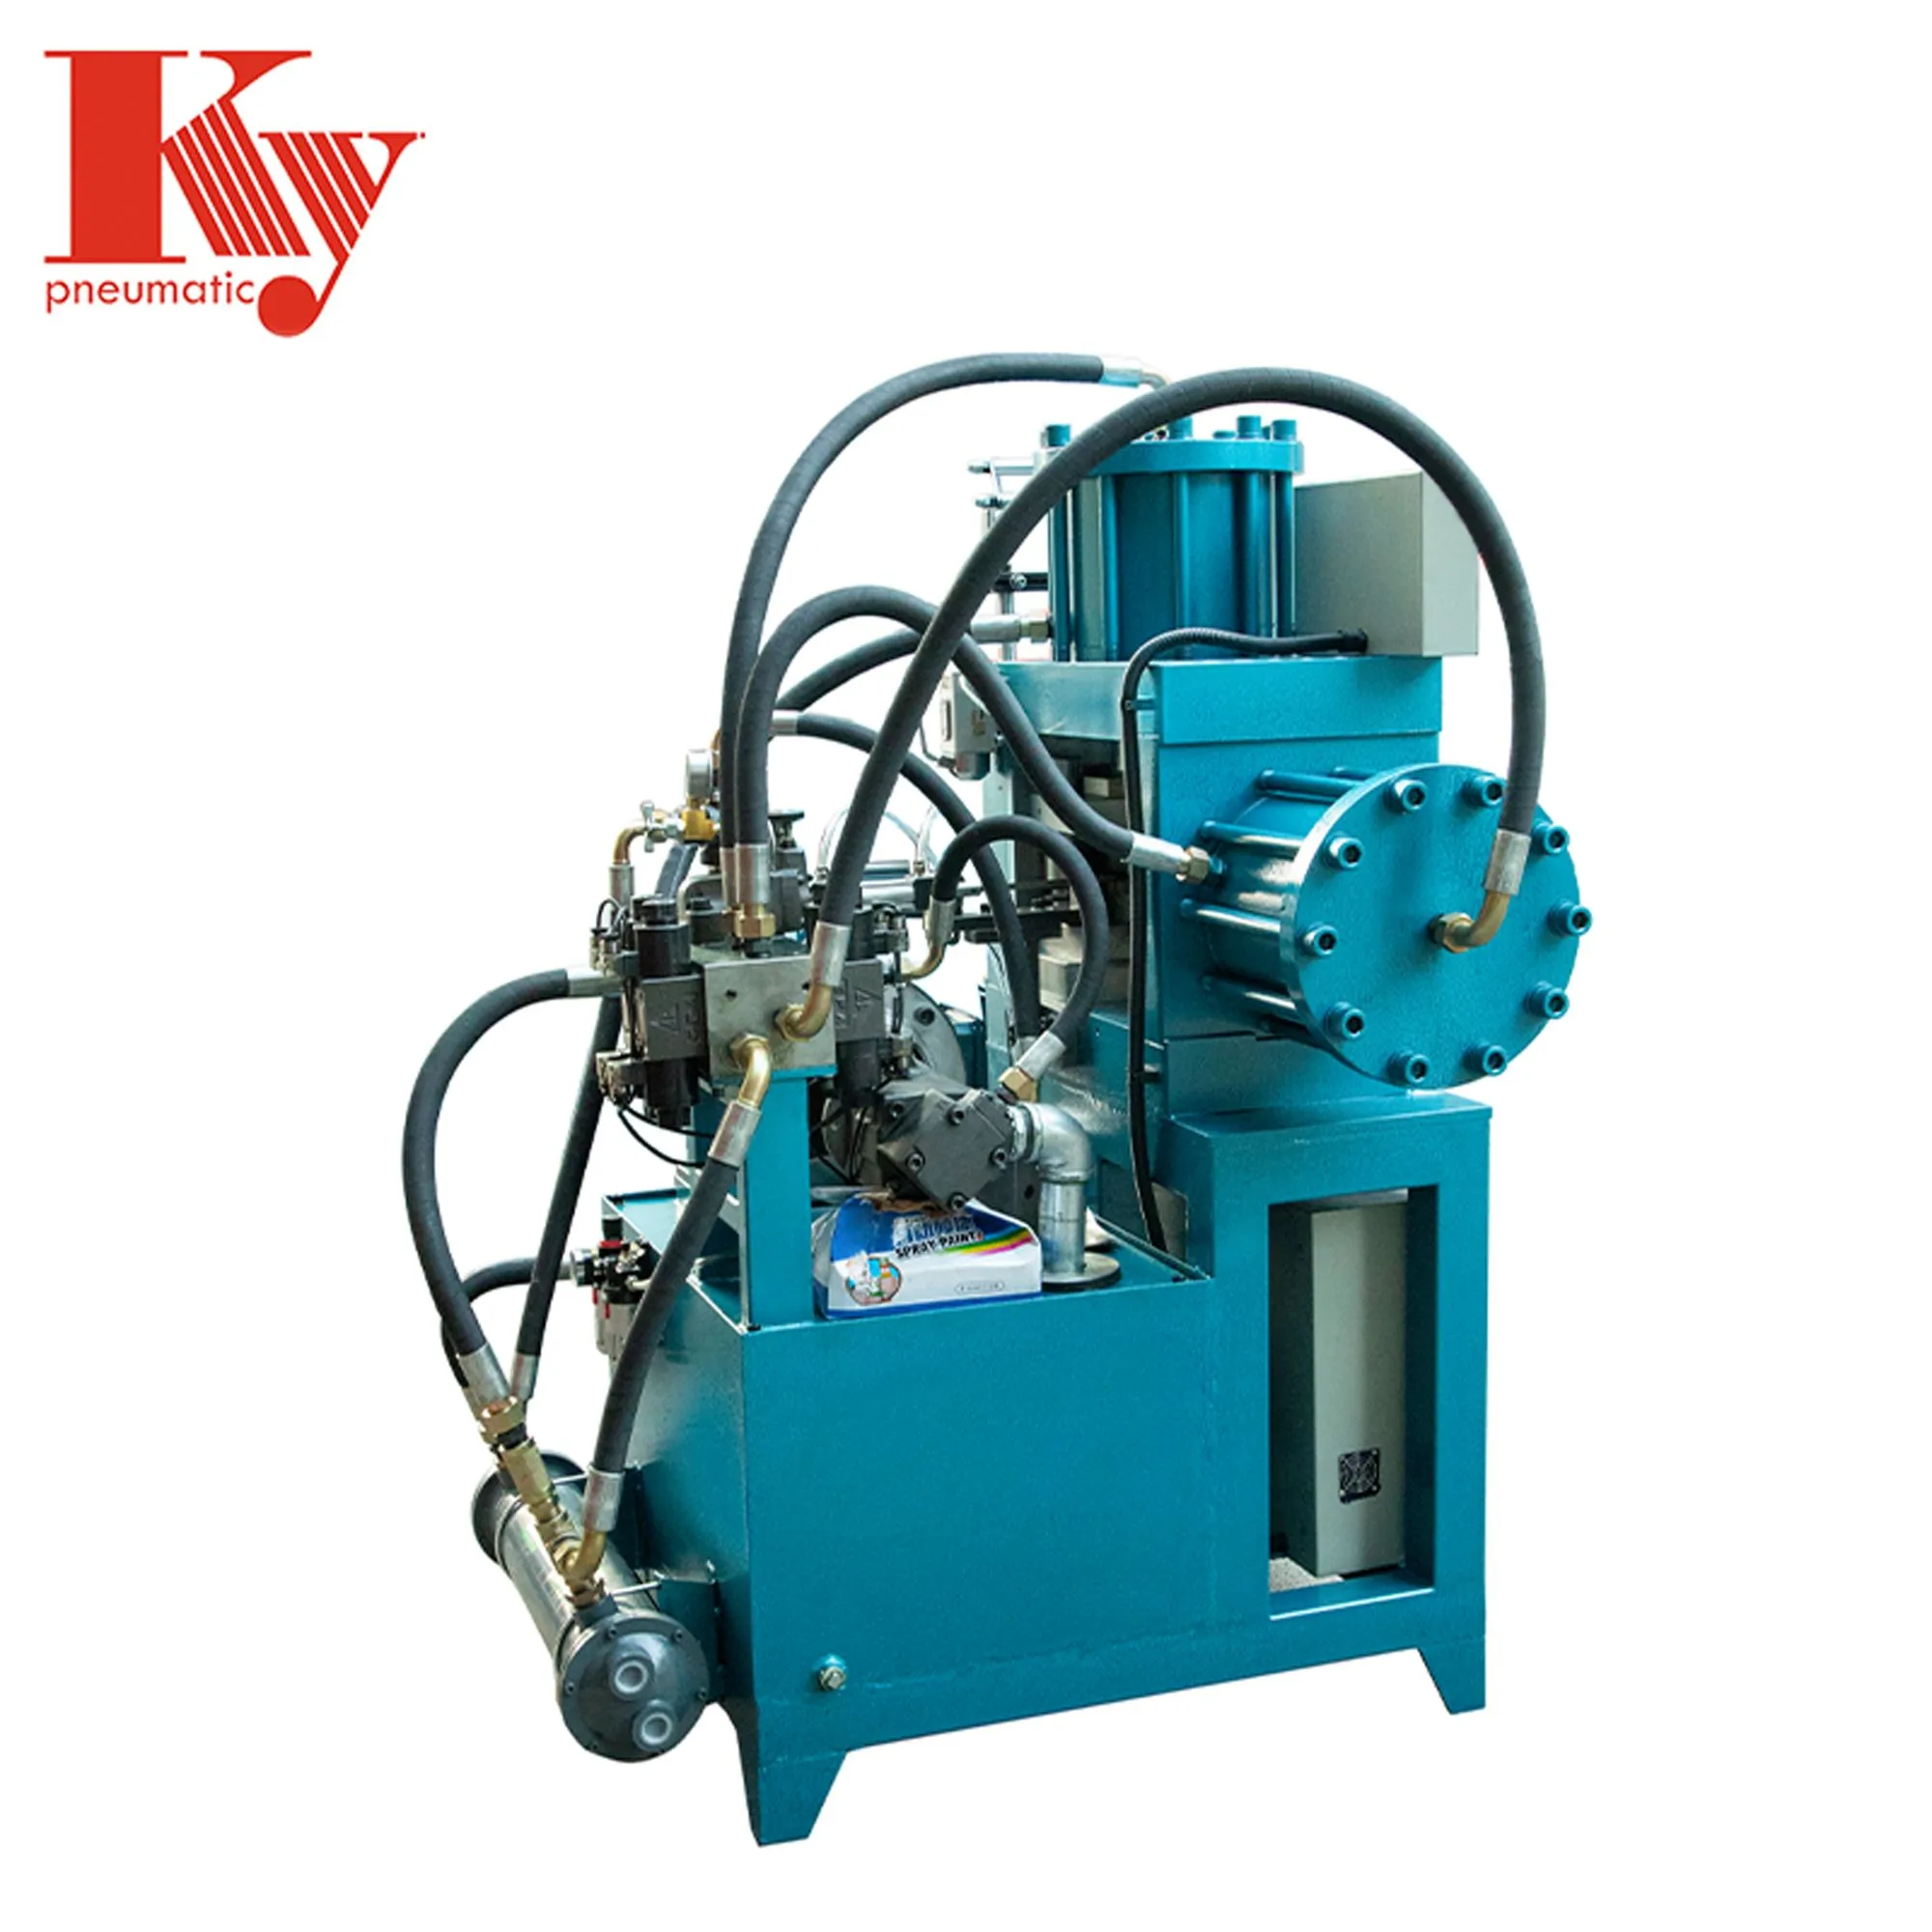 Care and Maintenance of the Wood Nail Making Machine